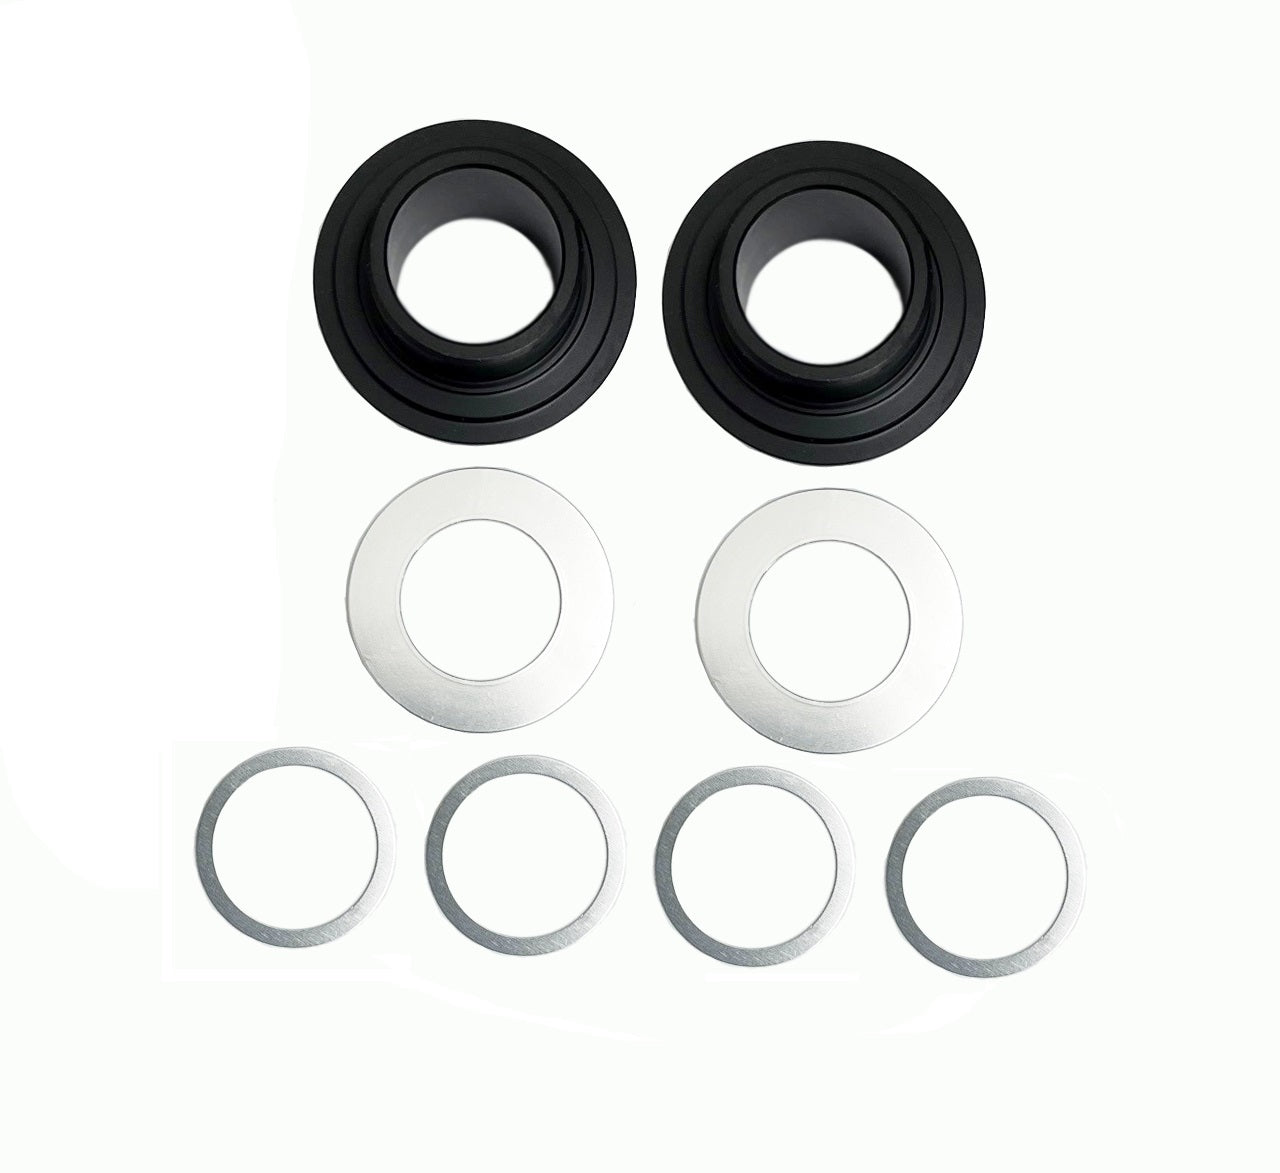 Pressfit 30 to 24mm Crank Spindle Adapter Shim for Hollowtech II Race Face X-Type FSA MegaExo